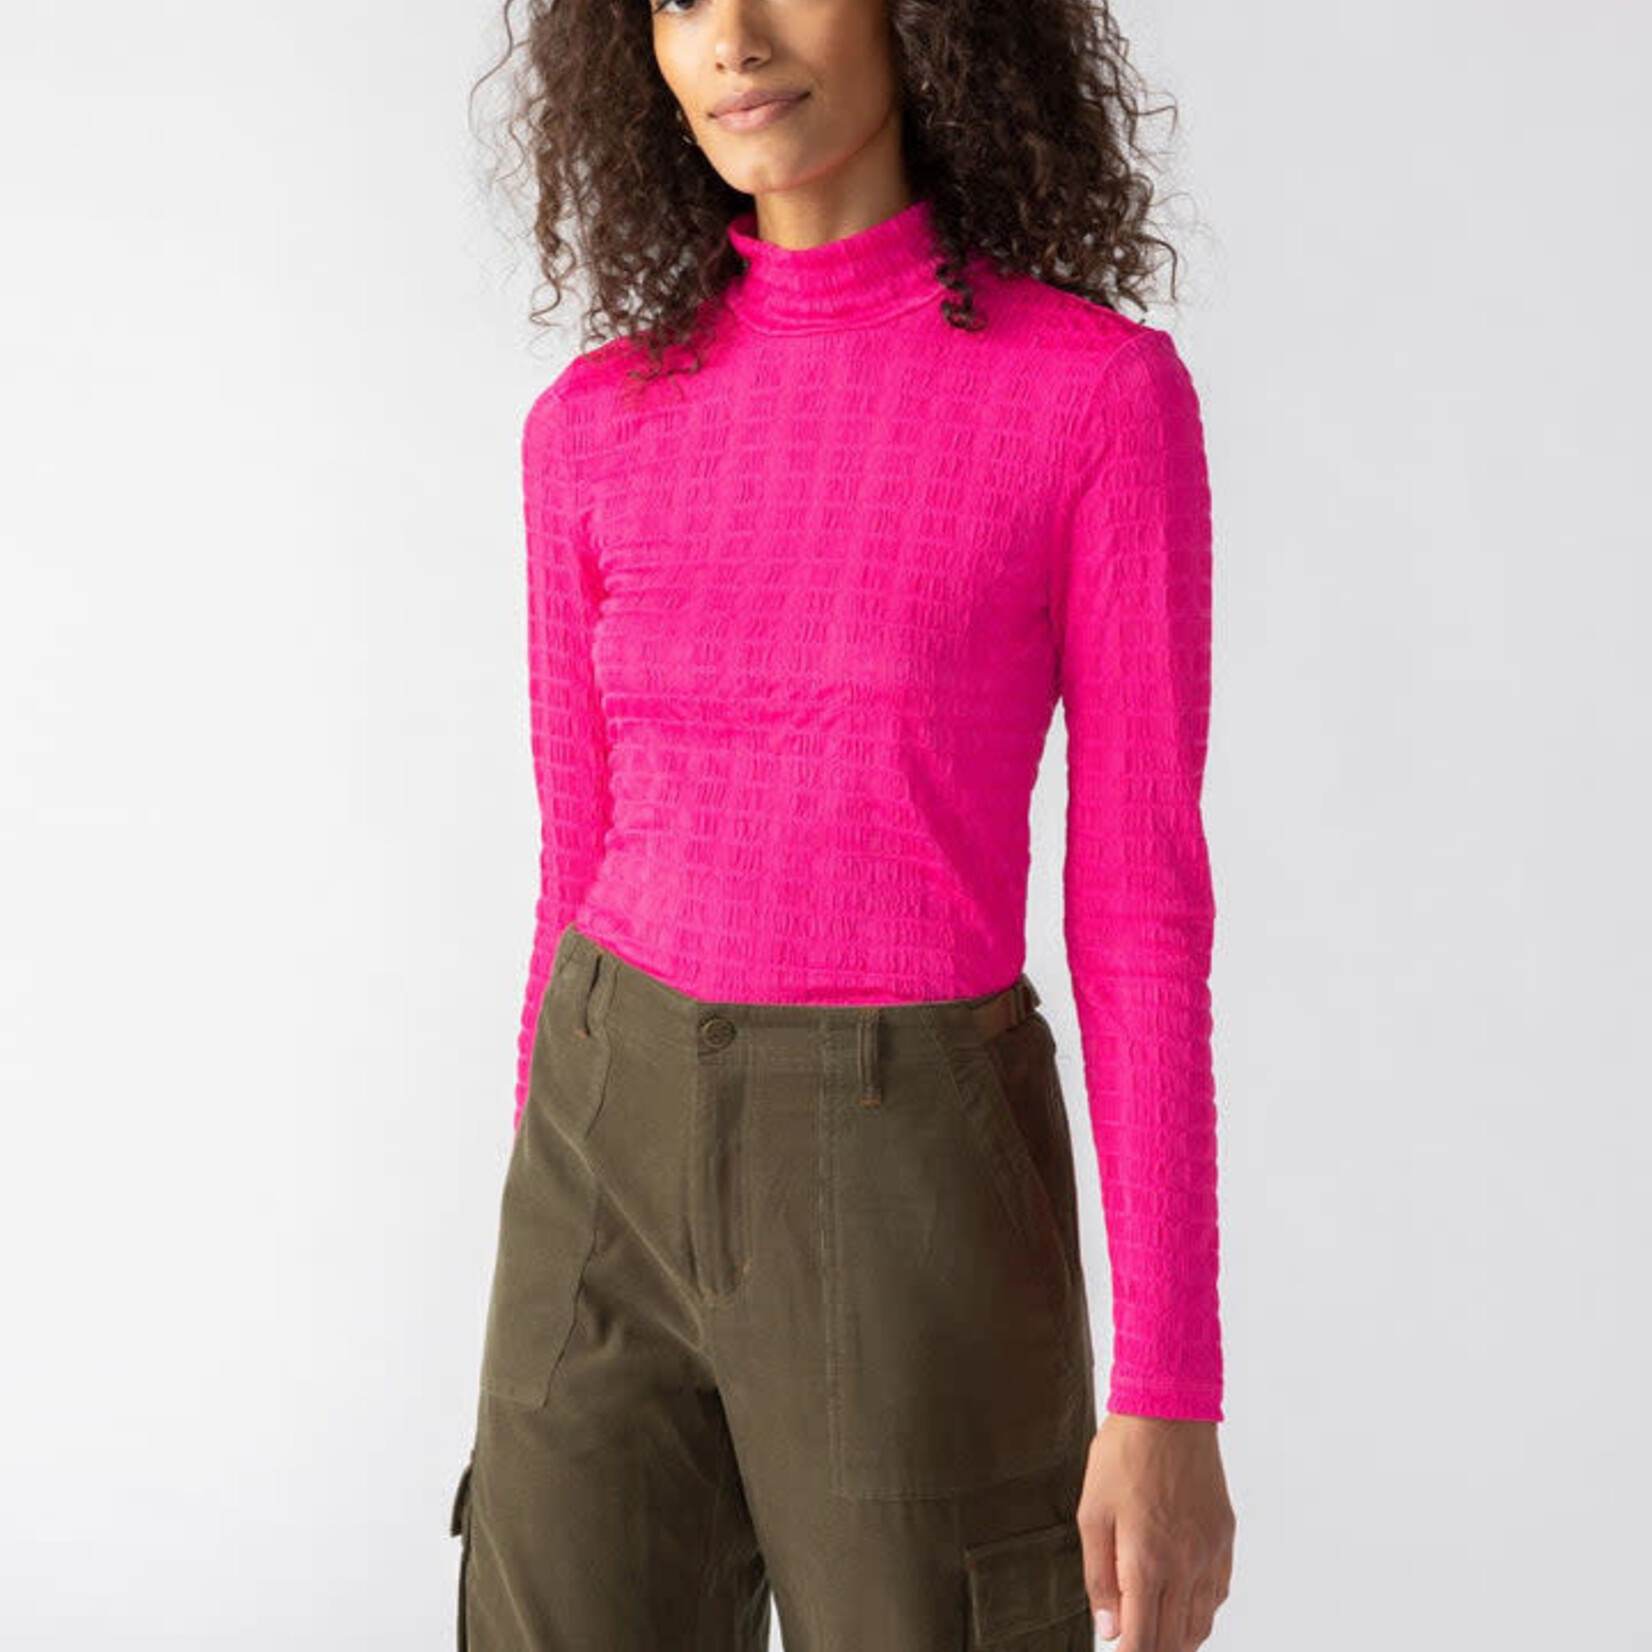 Sanctuary Clothing Textured Mock Top